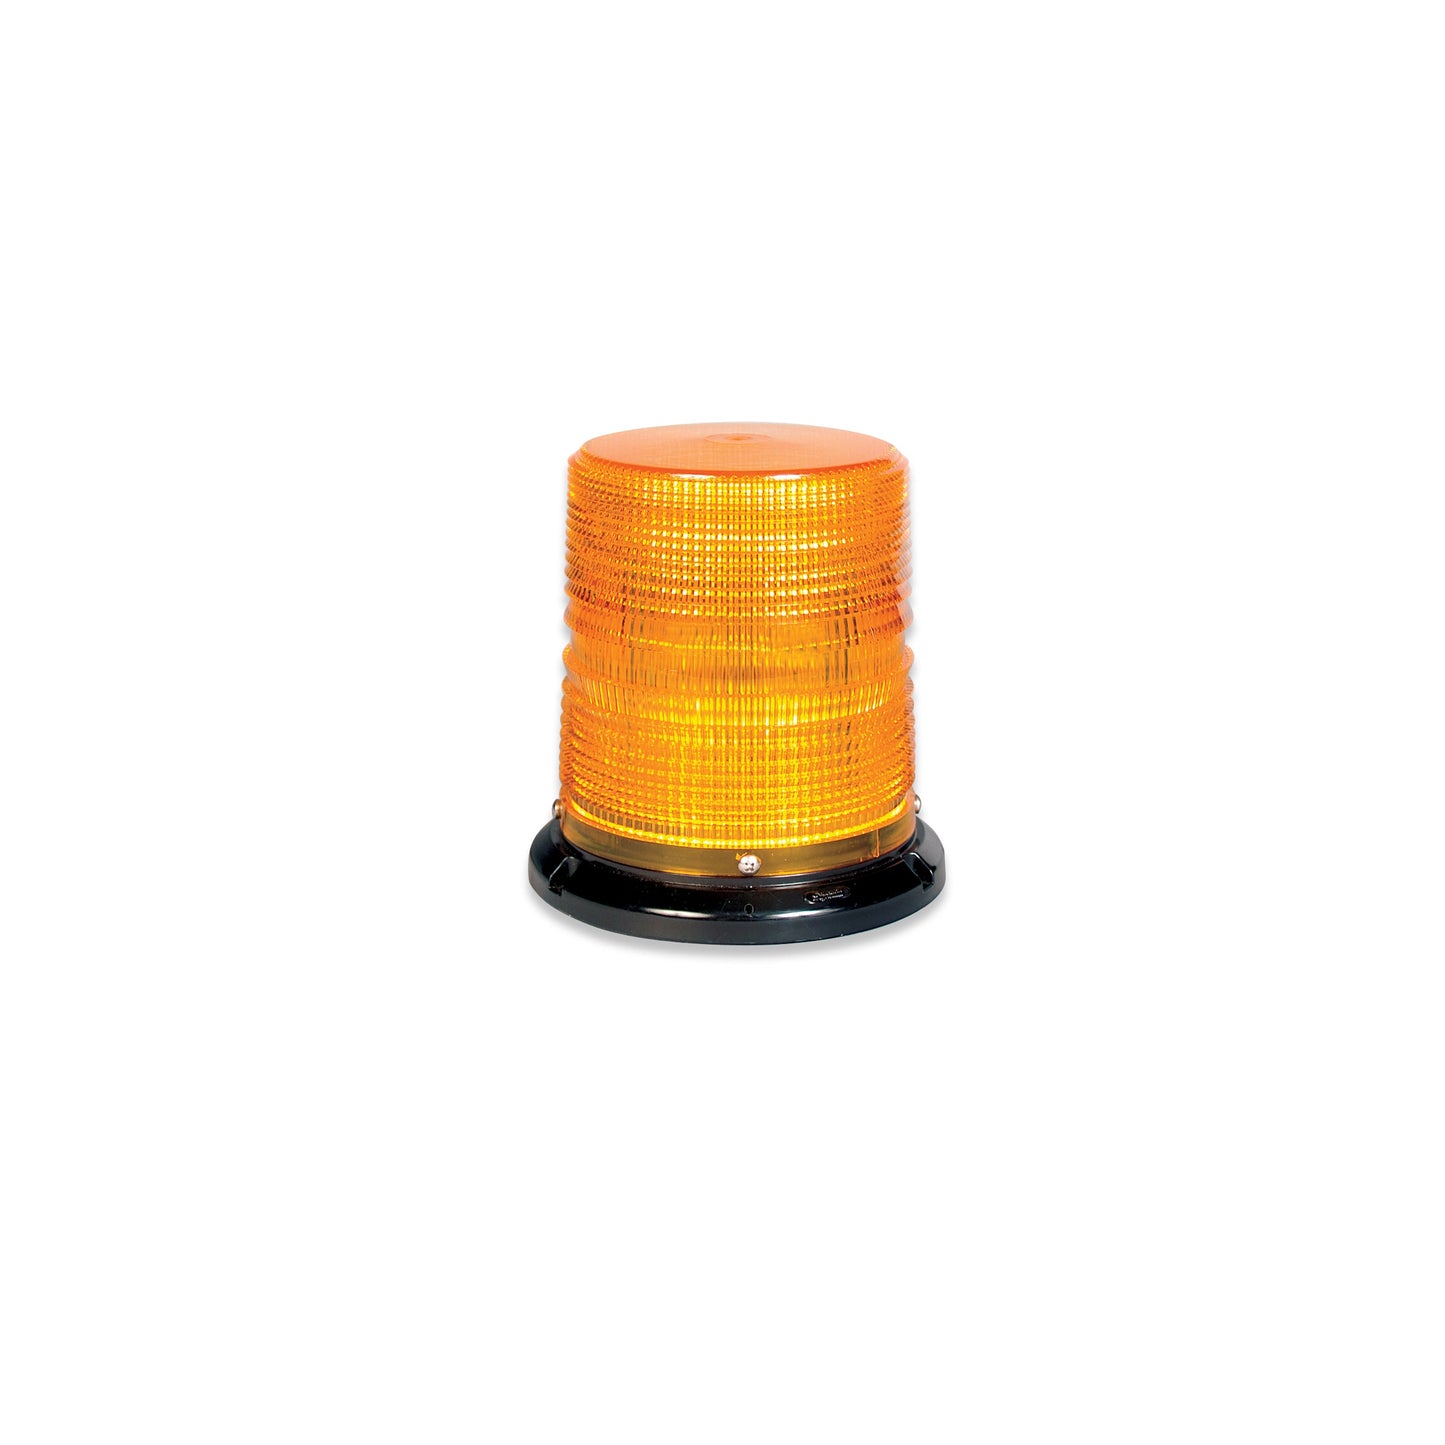 Soundoff Signal E360DC6 Clear Dust Cover - Ca Title 13 Compliancy (Fits 3000, 4200, 4500 & 4800 Series Beacons, 4" & 6" Dome Heights